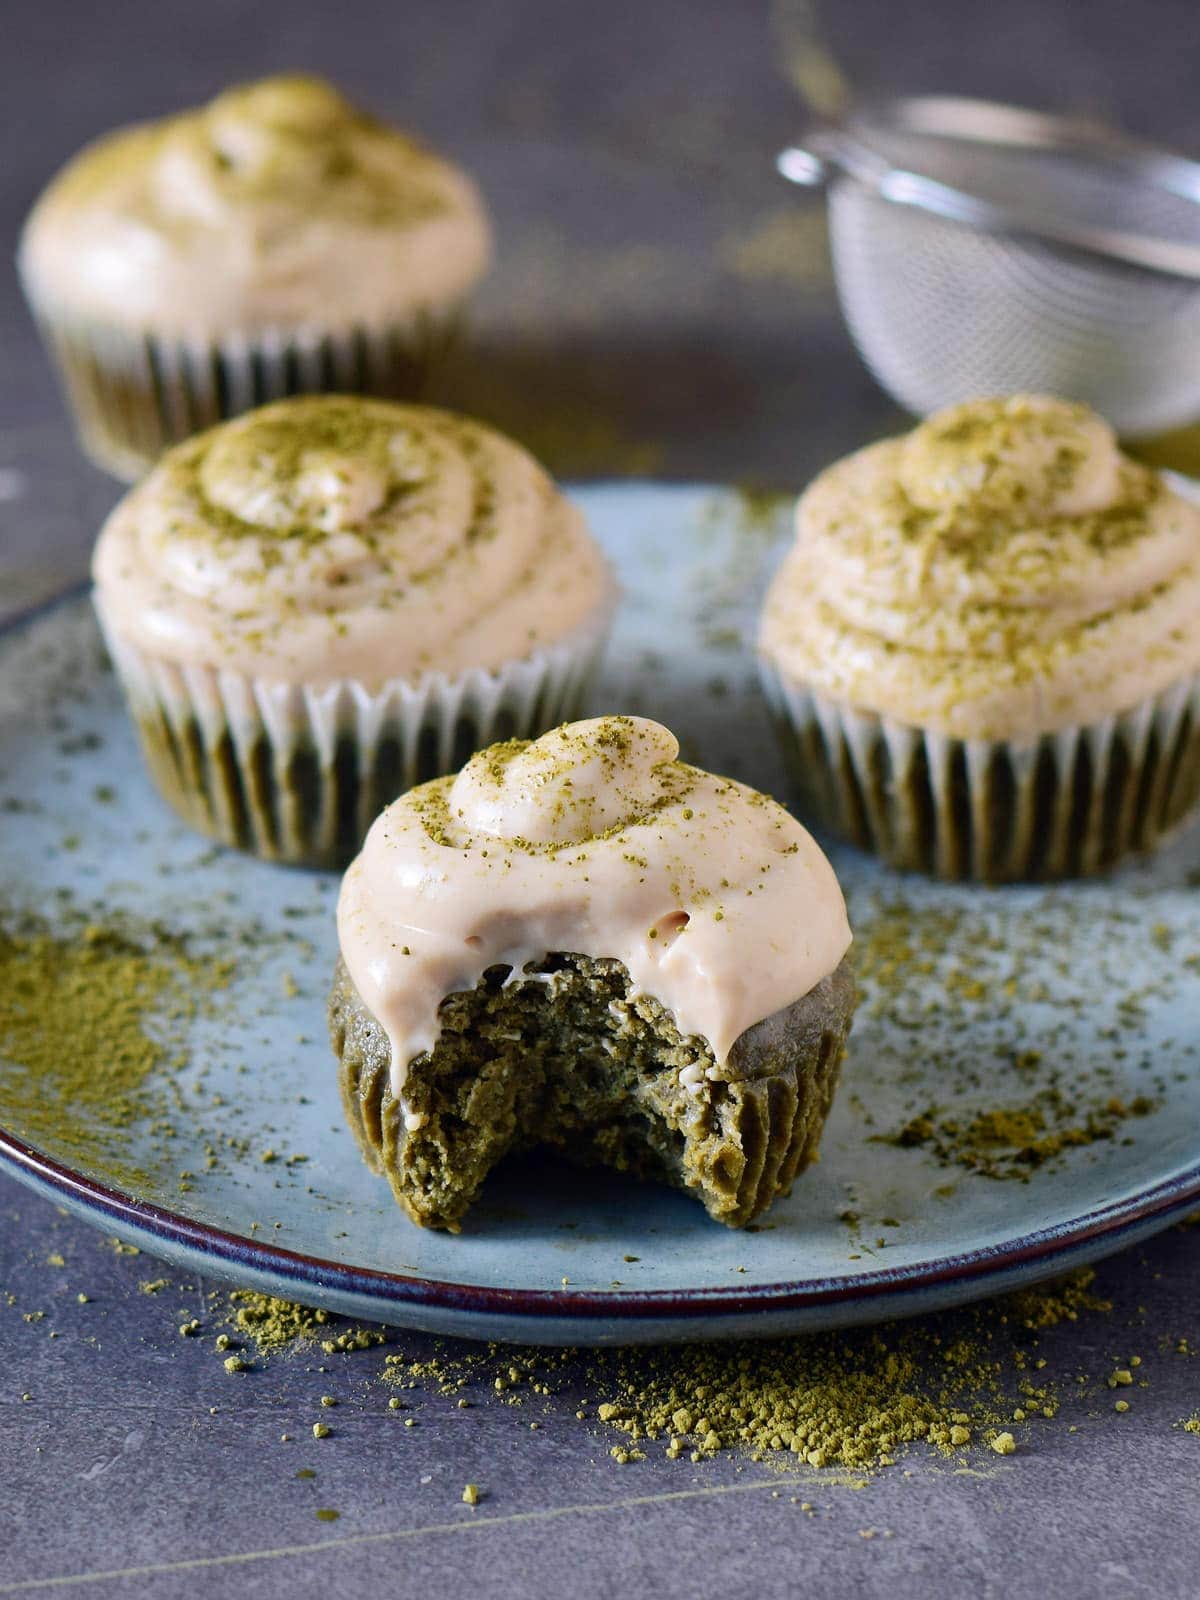 eating matcha cupcake with white frosting sprinkled with green powder